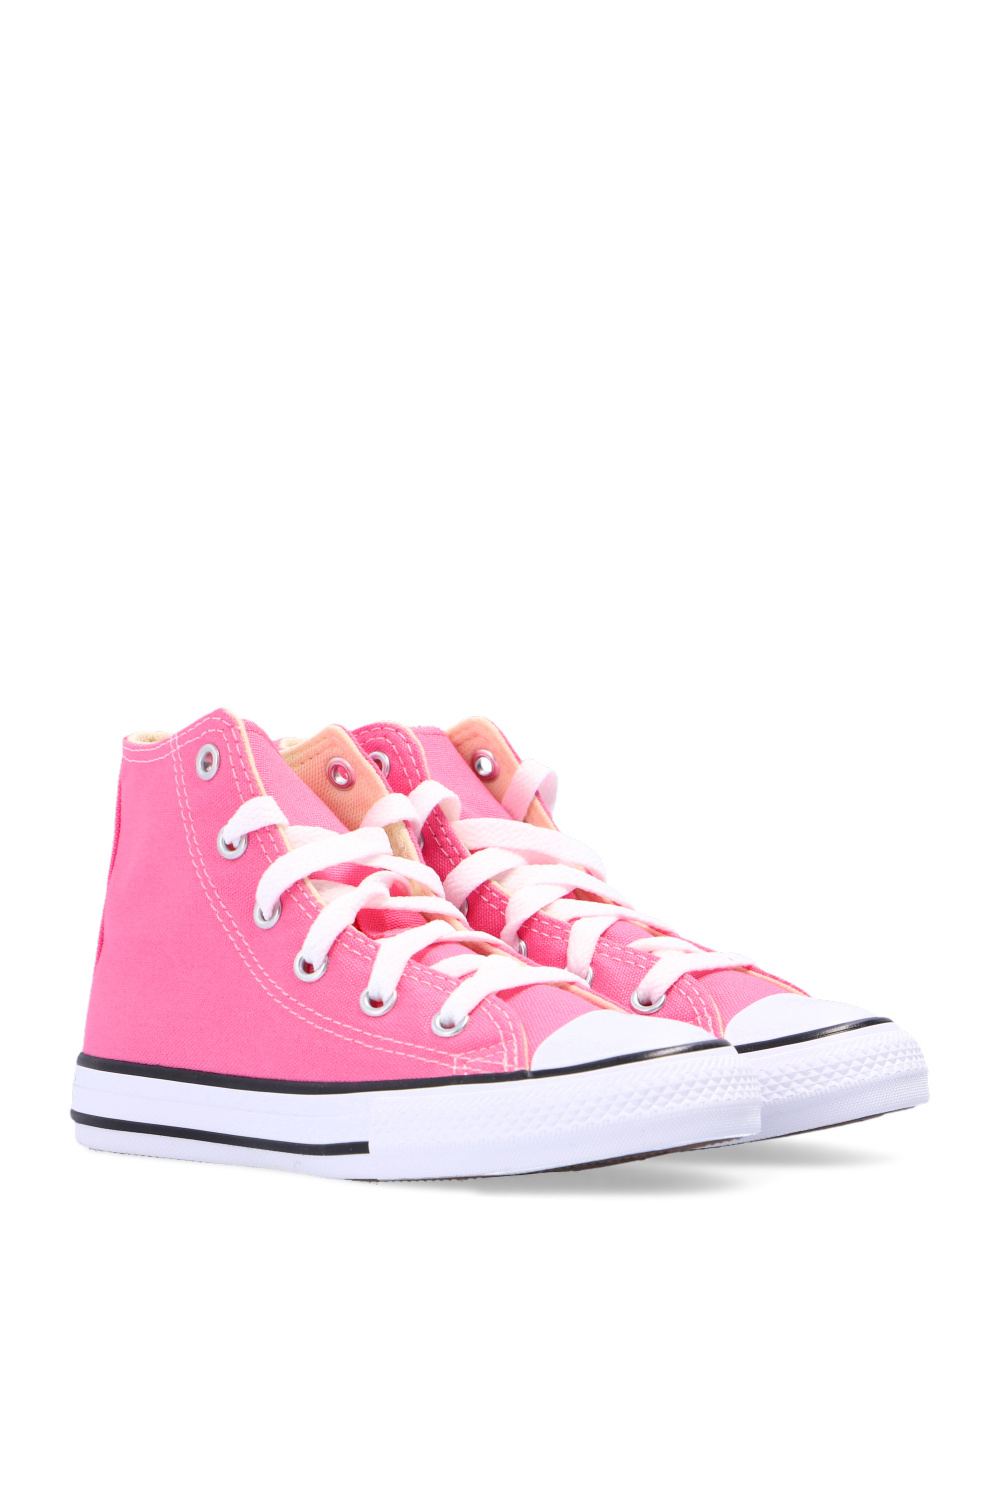 converse and Kids ‘Chuck Taylor All Star Core Hi’ sneakers